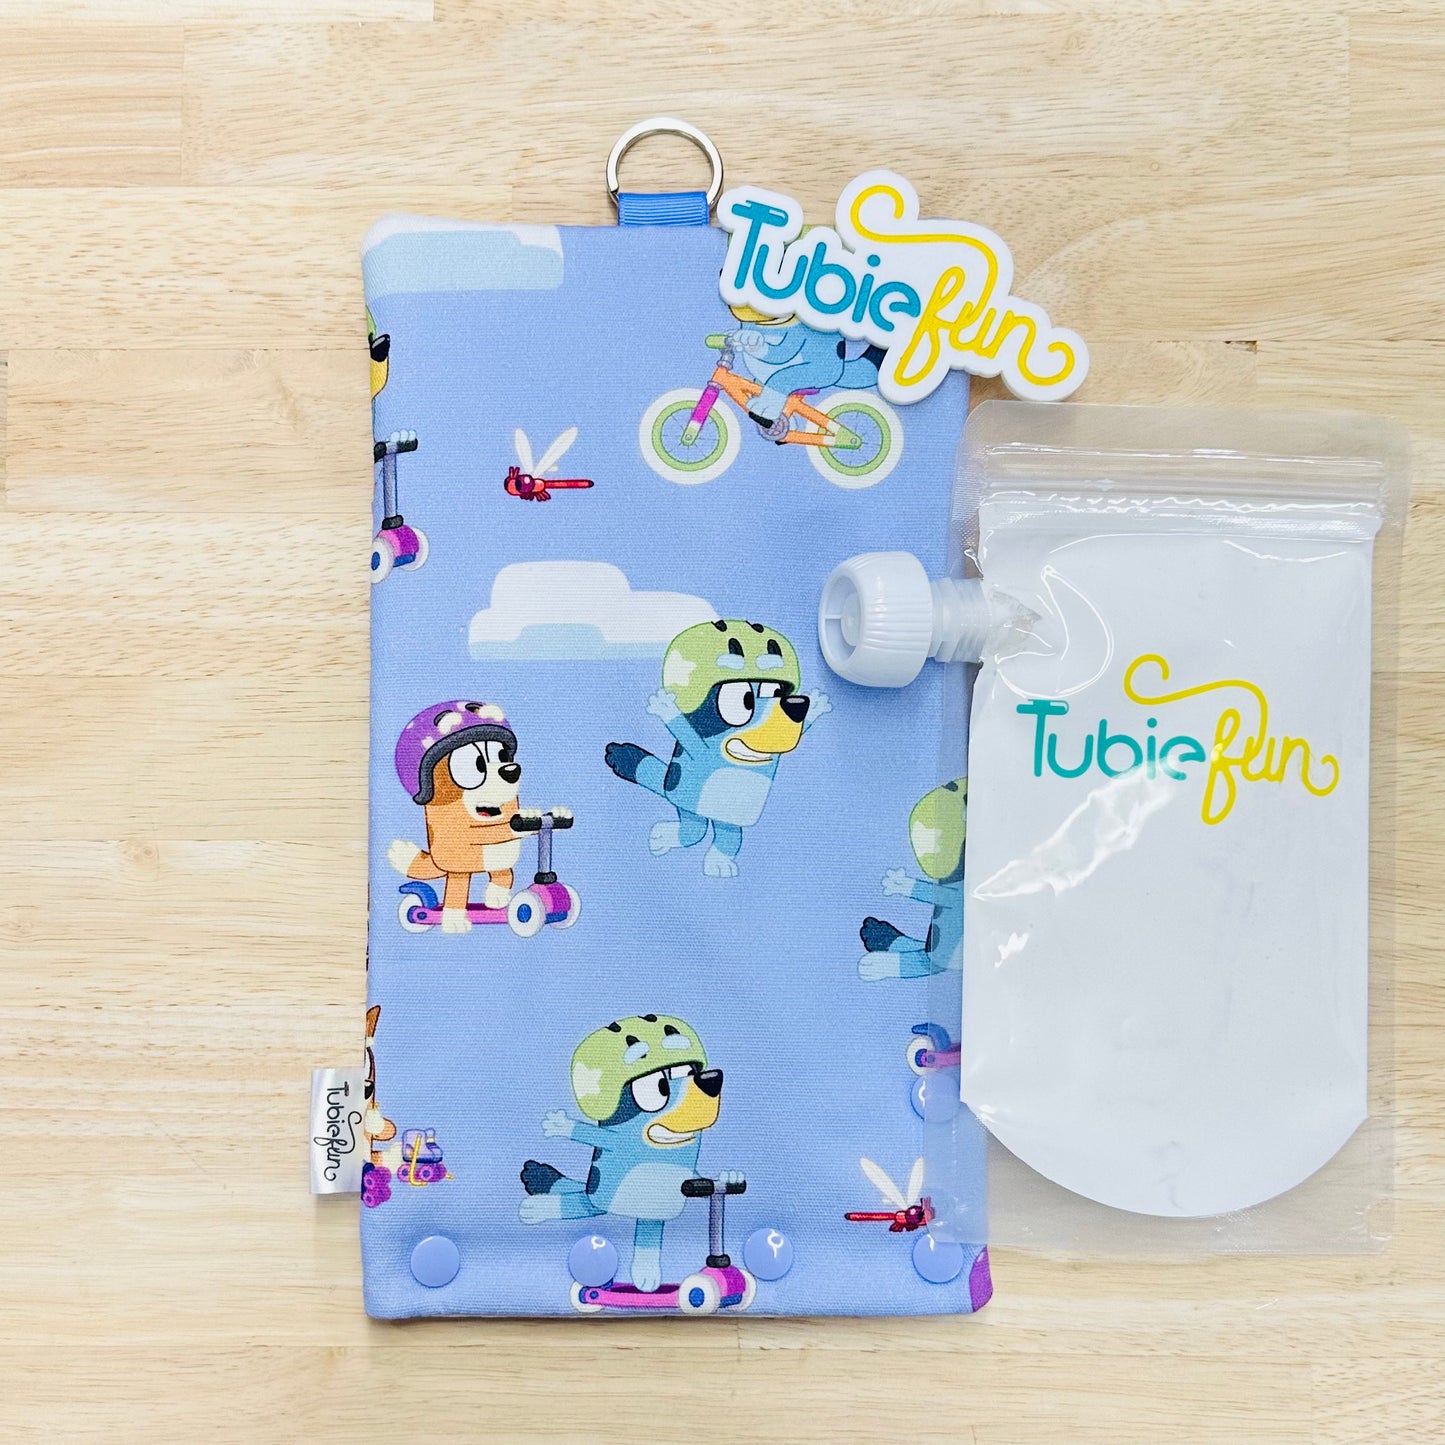 NEW Insulated Milk Bag Suitable for Tubie Fun 500ml Reusable Pouches - Aussie Heeler Sisters on Purple